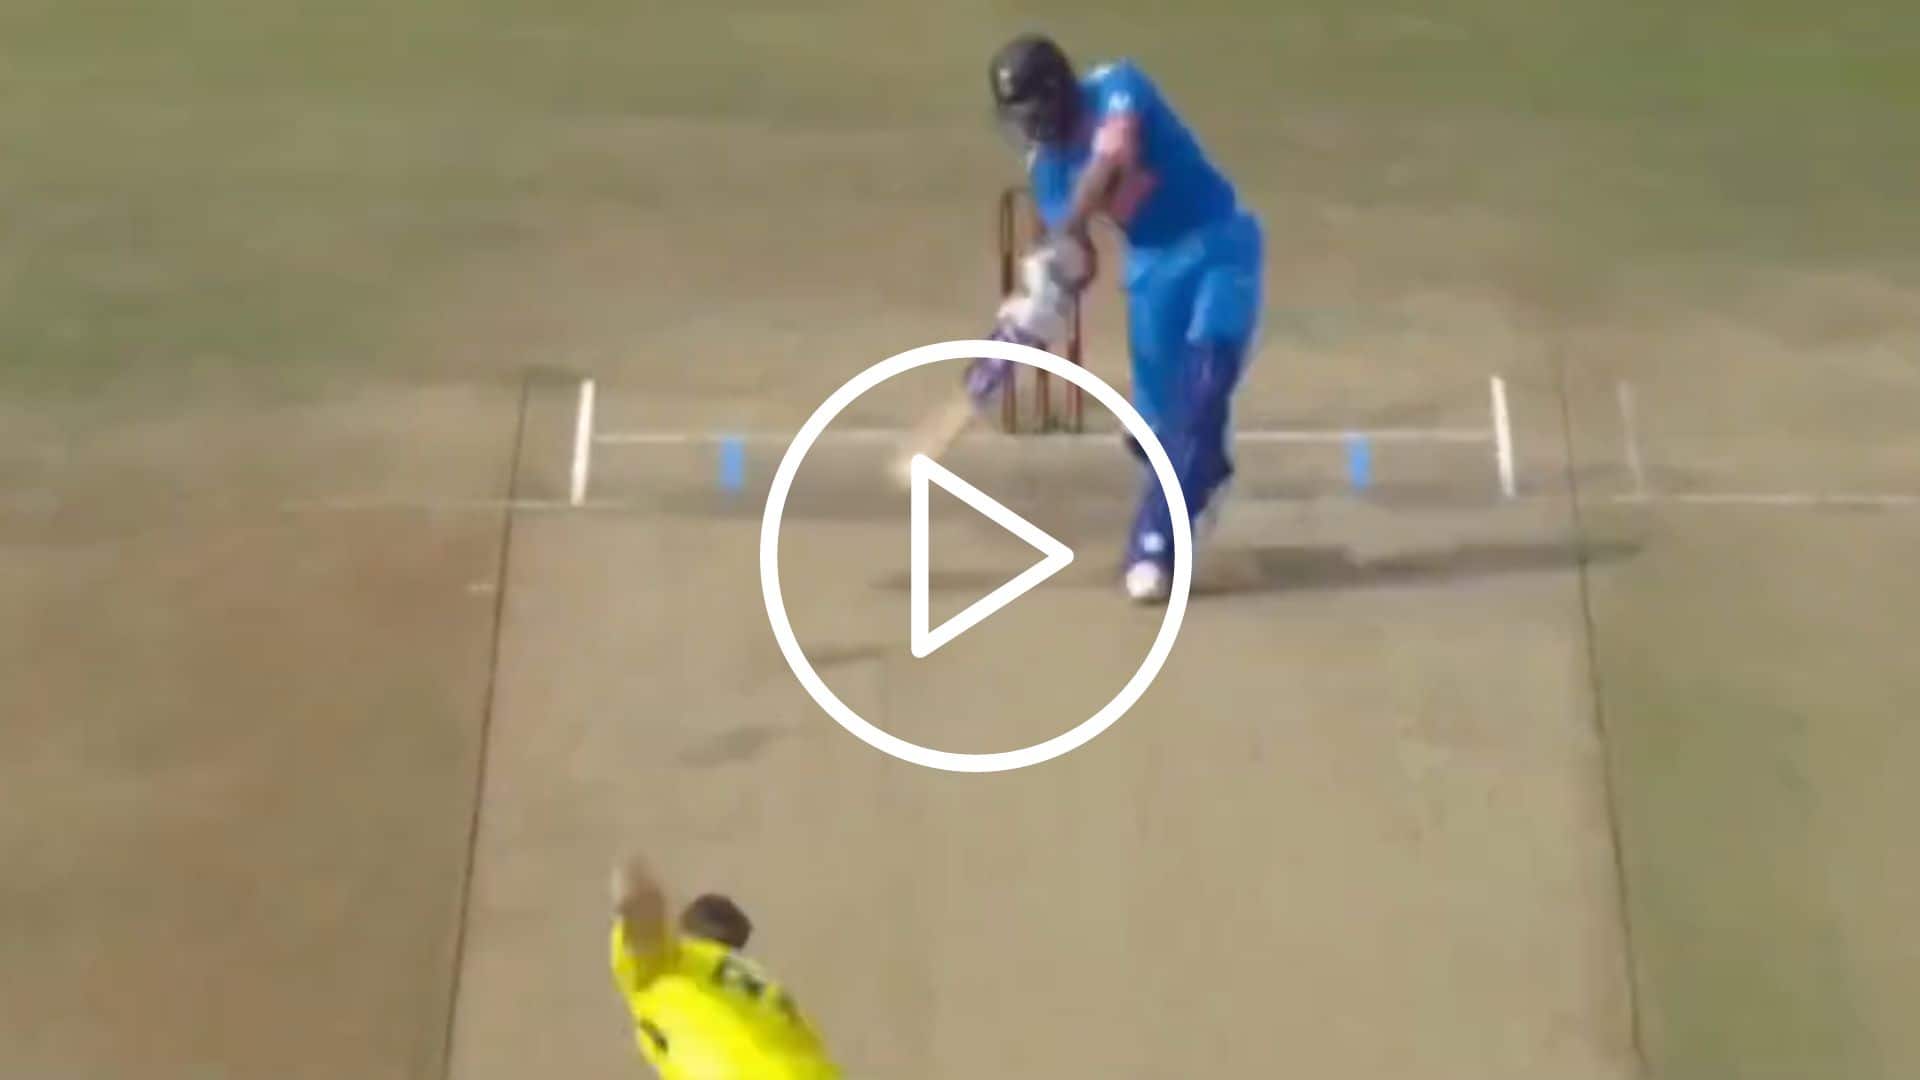 [Watch] Shubman Gill Slams Green For A Monstrous Six To Get To His 37-Ball Fifty